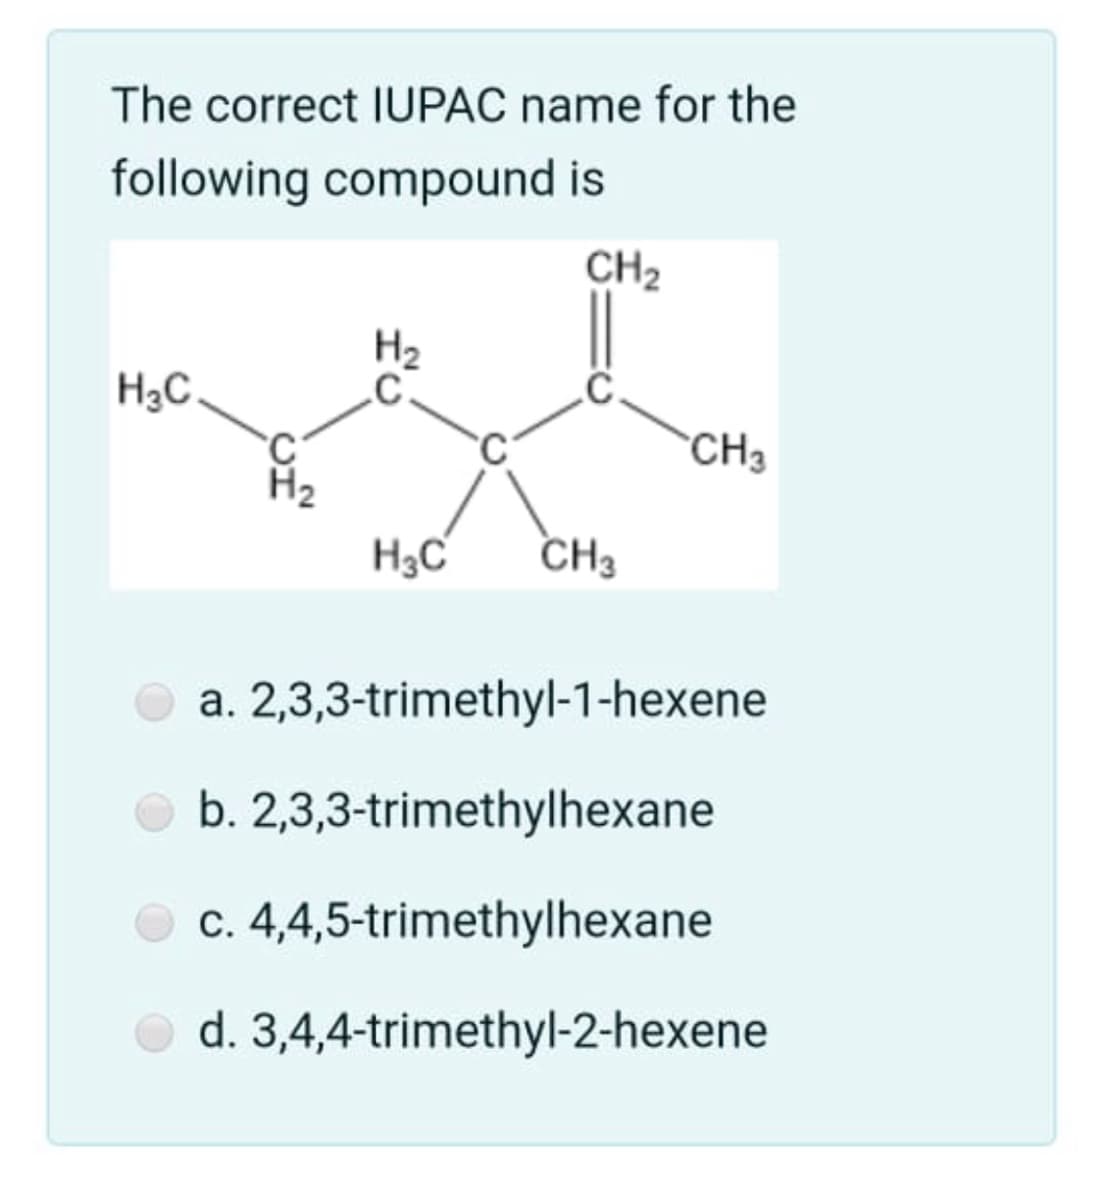 The correct IUPAC name for the
following compound is
CH2
H2
H3C.
CH3
H2
H3C
CH3
a. 2,3,3-trimethyl-1-hexene
b. 2,3,3-trimethylhexane
c. 4,4,5-trimethylhexane
d. 3,4,4-trimethyl-2-hexene
